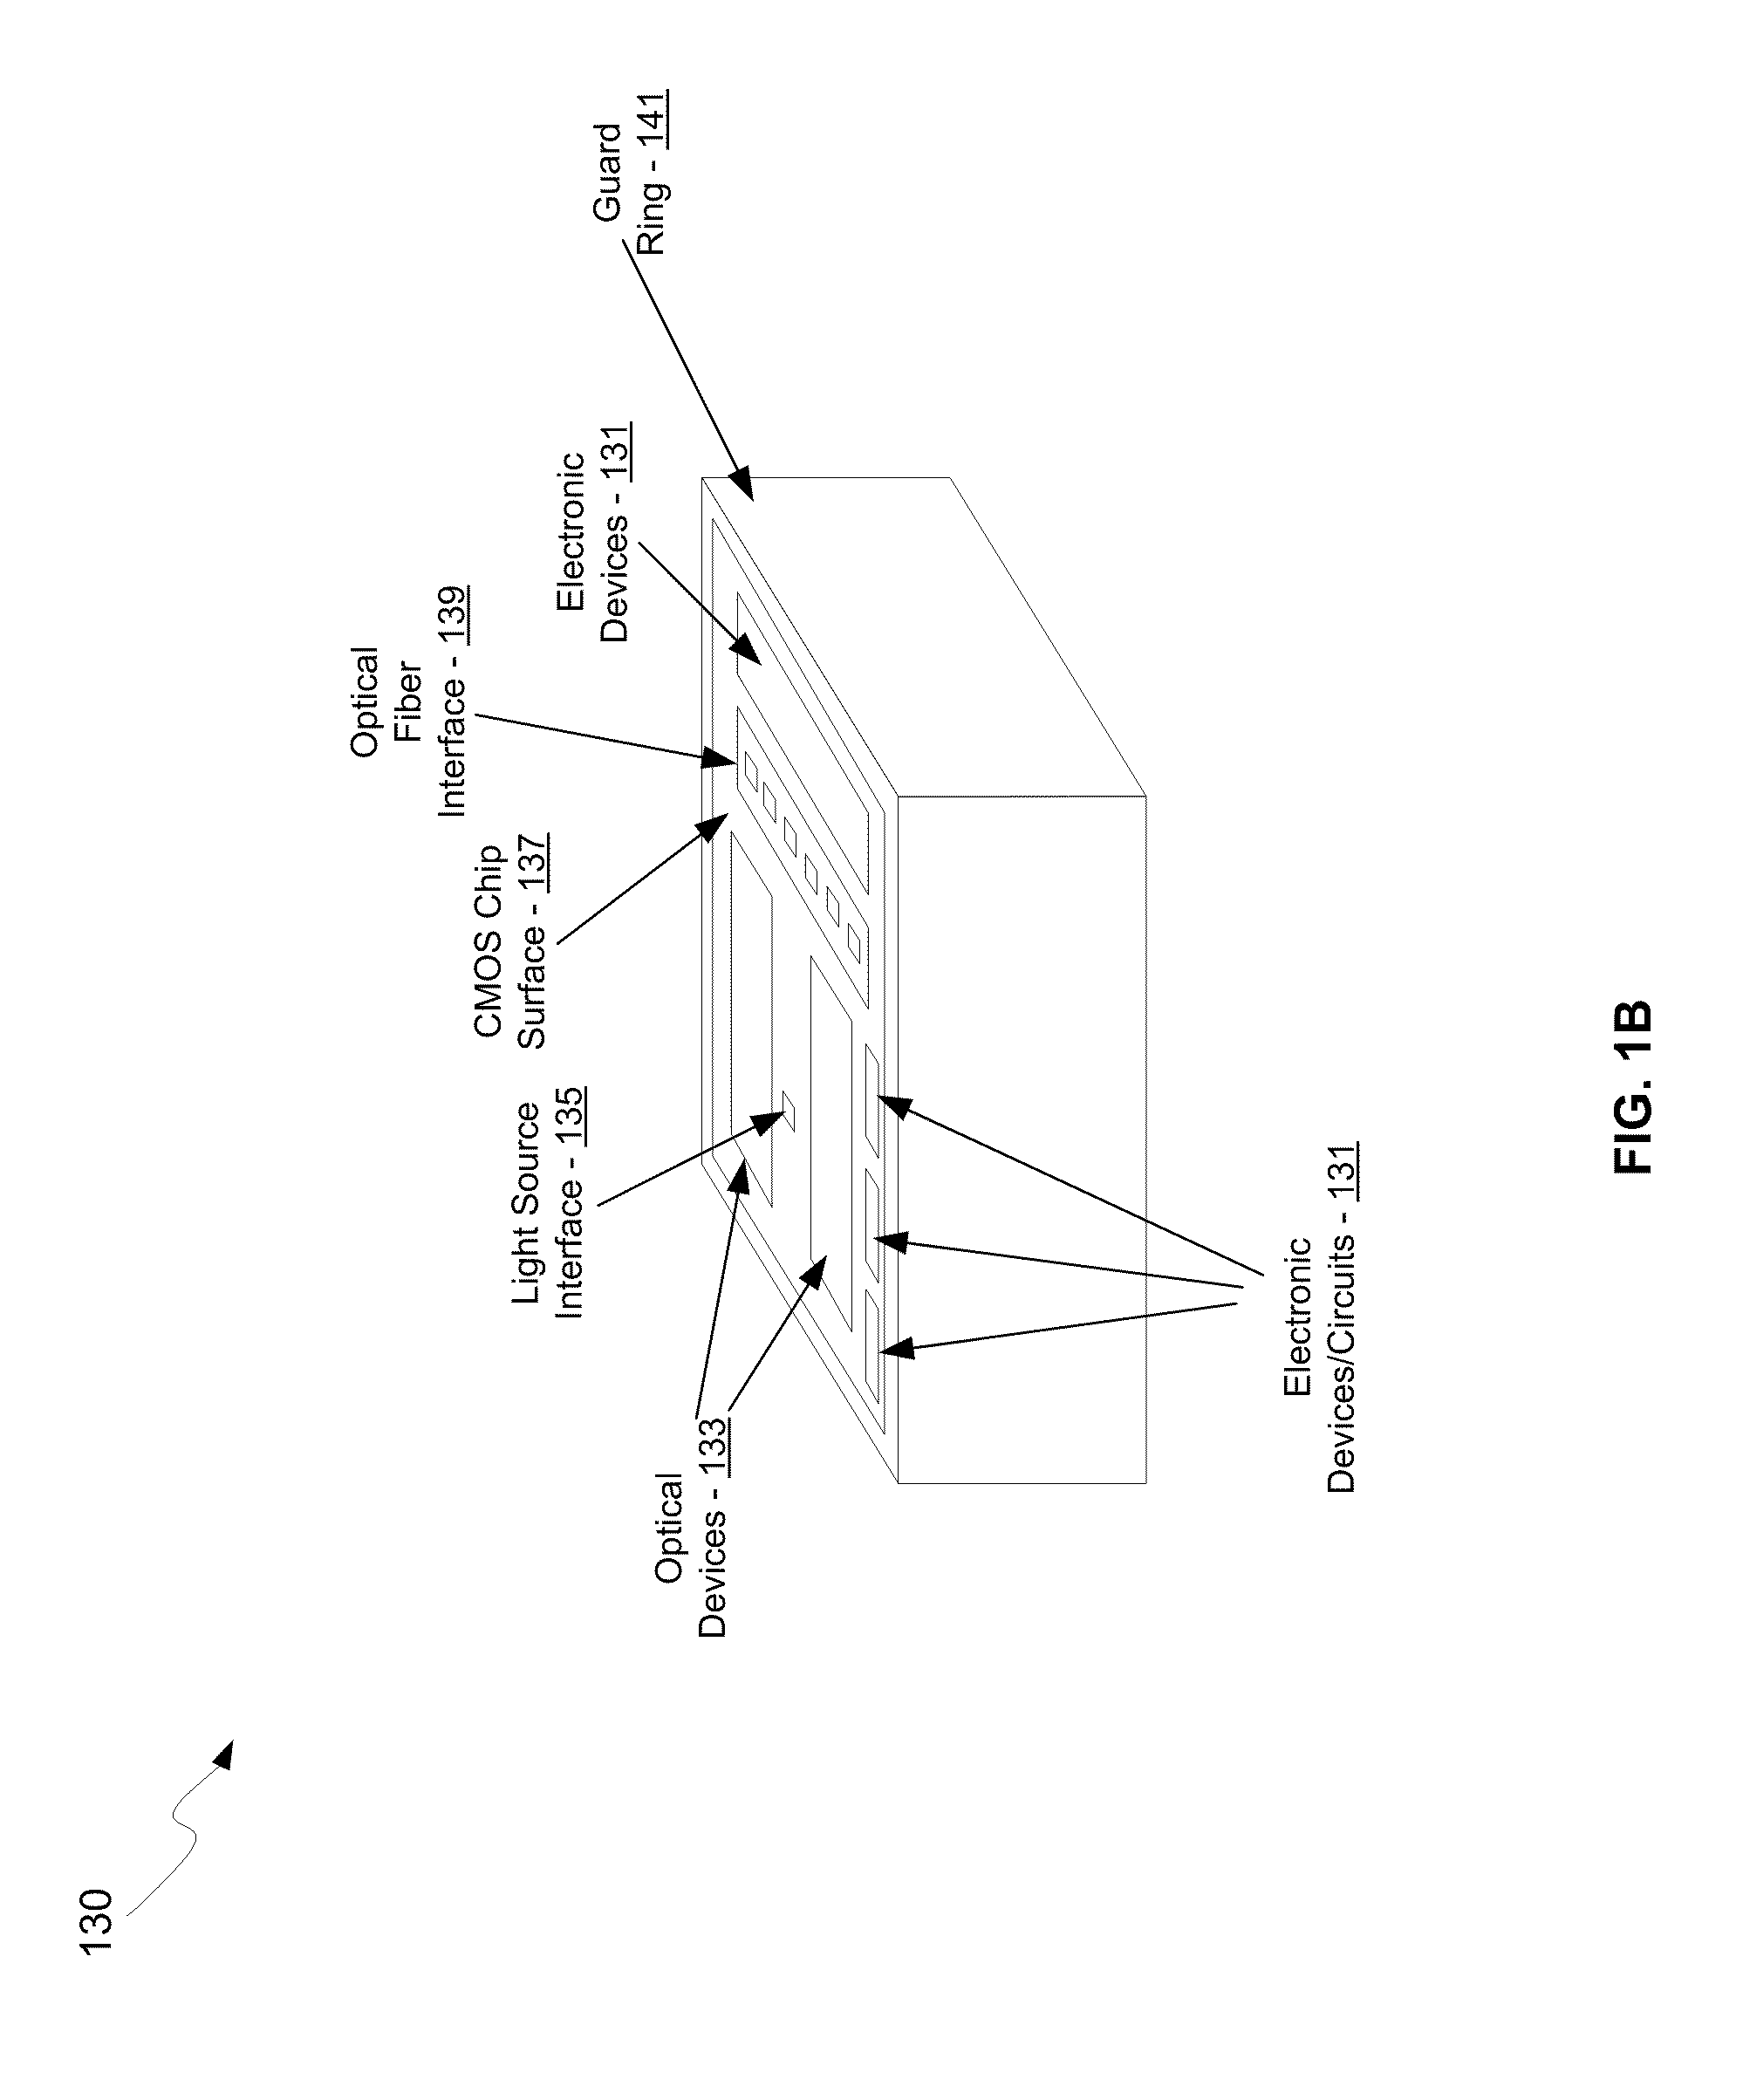 Method and System for Waveguide Mode Filters